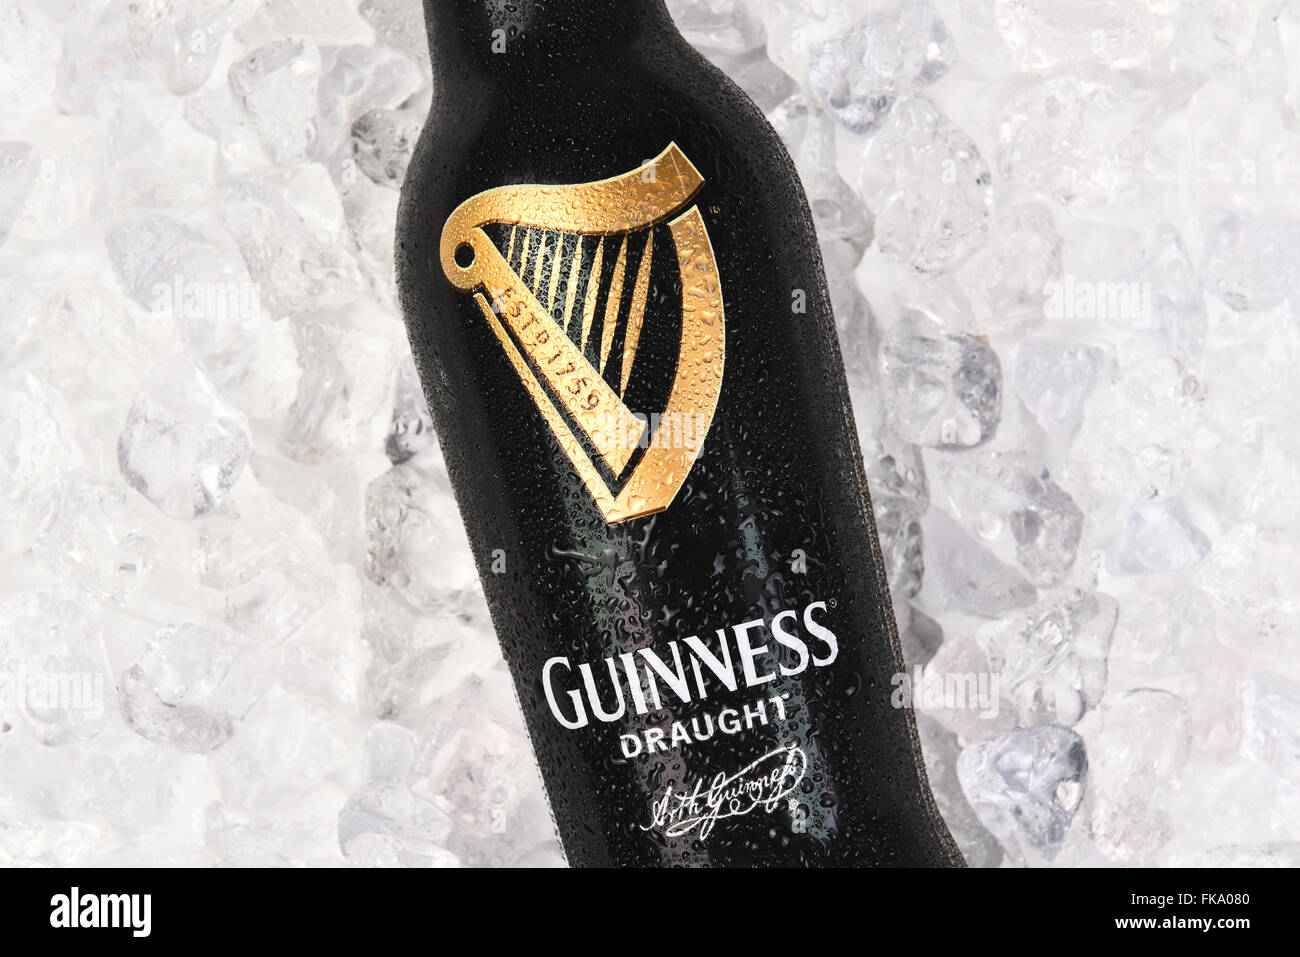 Closeup of a Guinness Draught Bottle on Ice. Horizontal format. Stock Photo